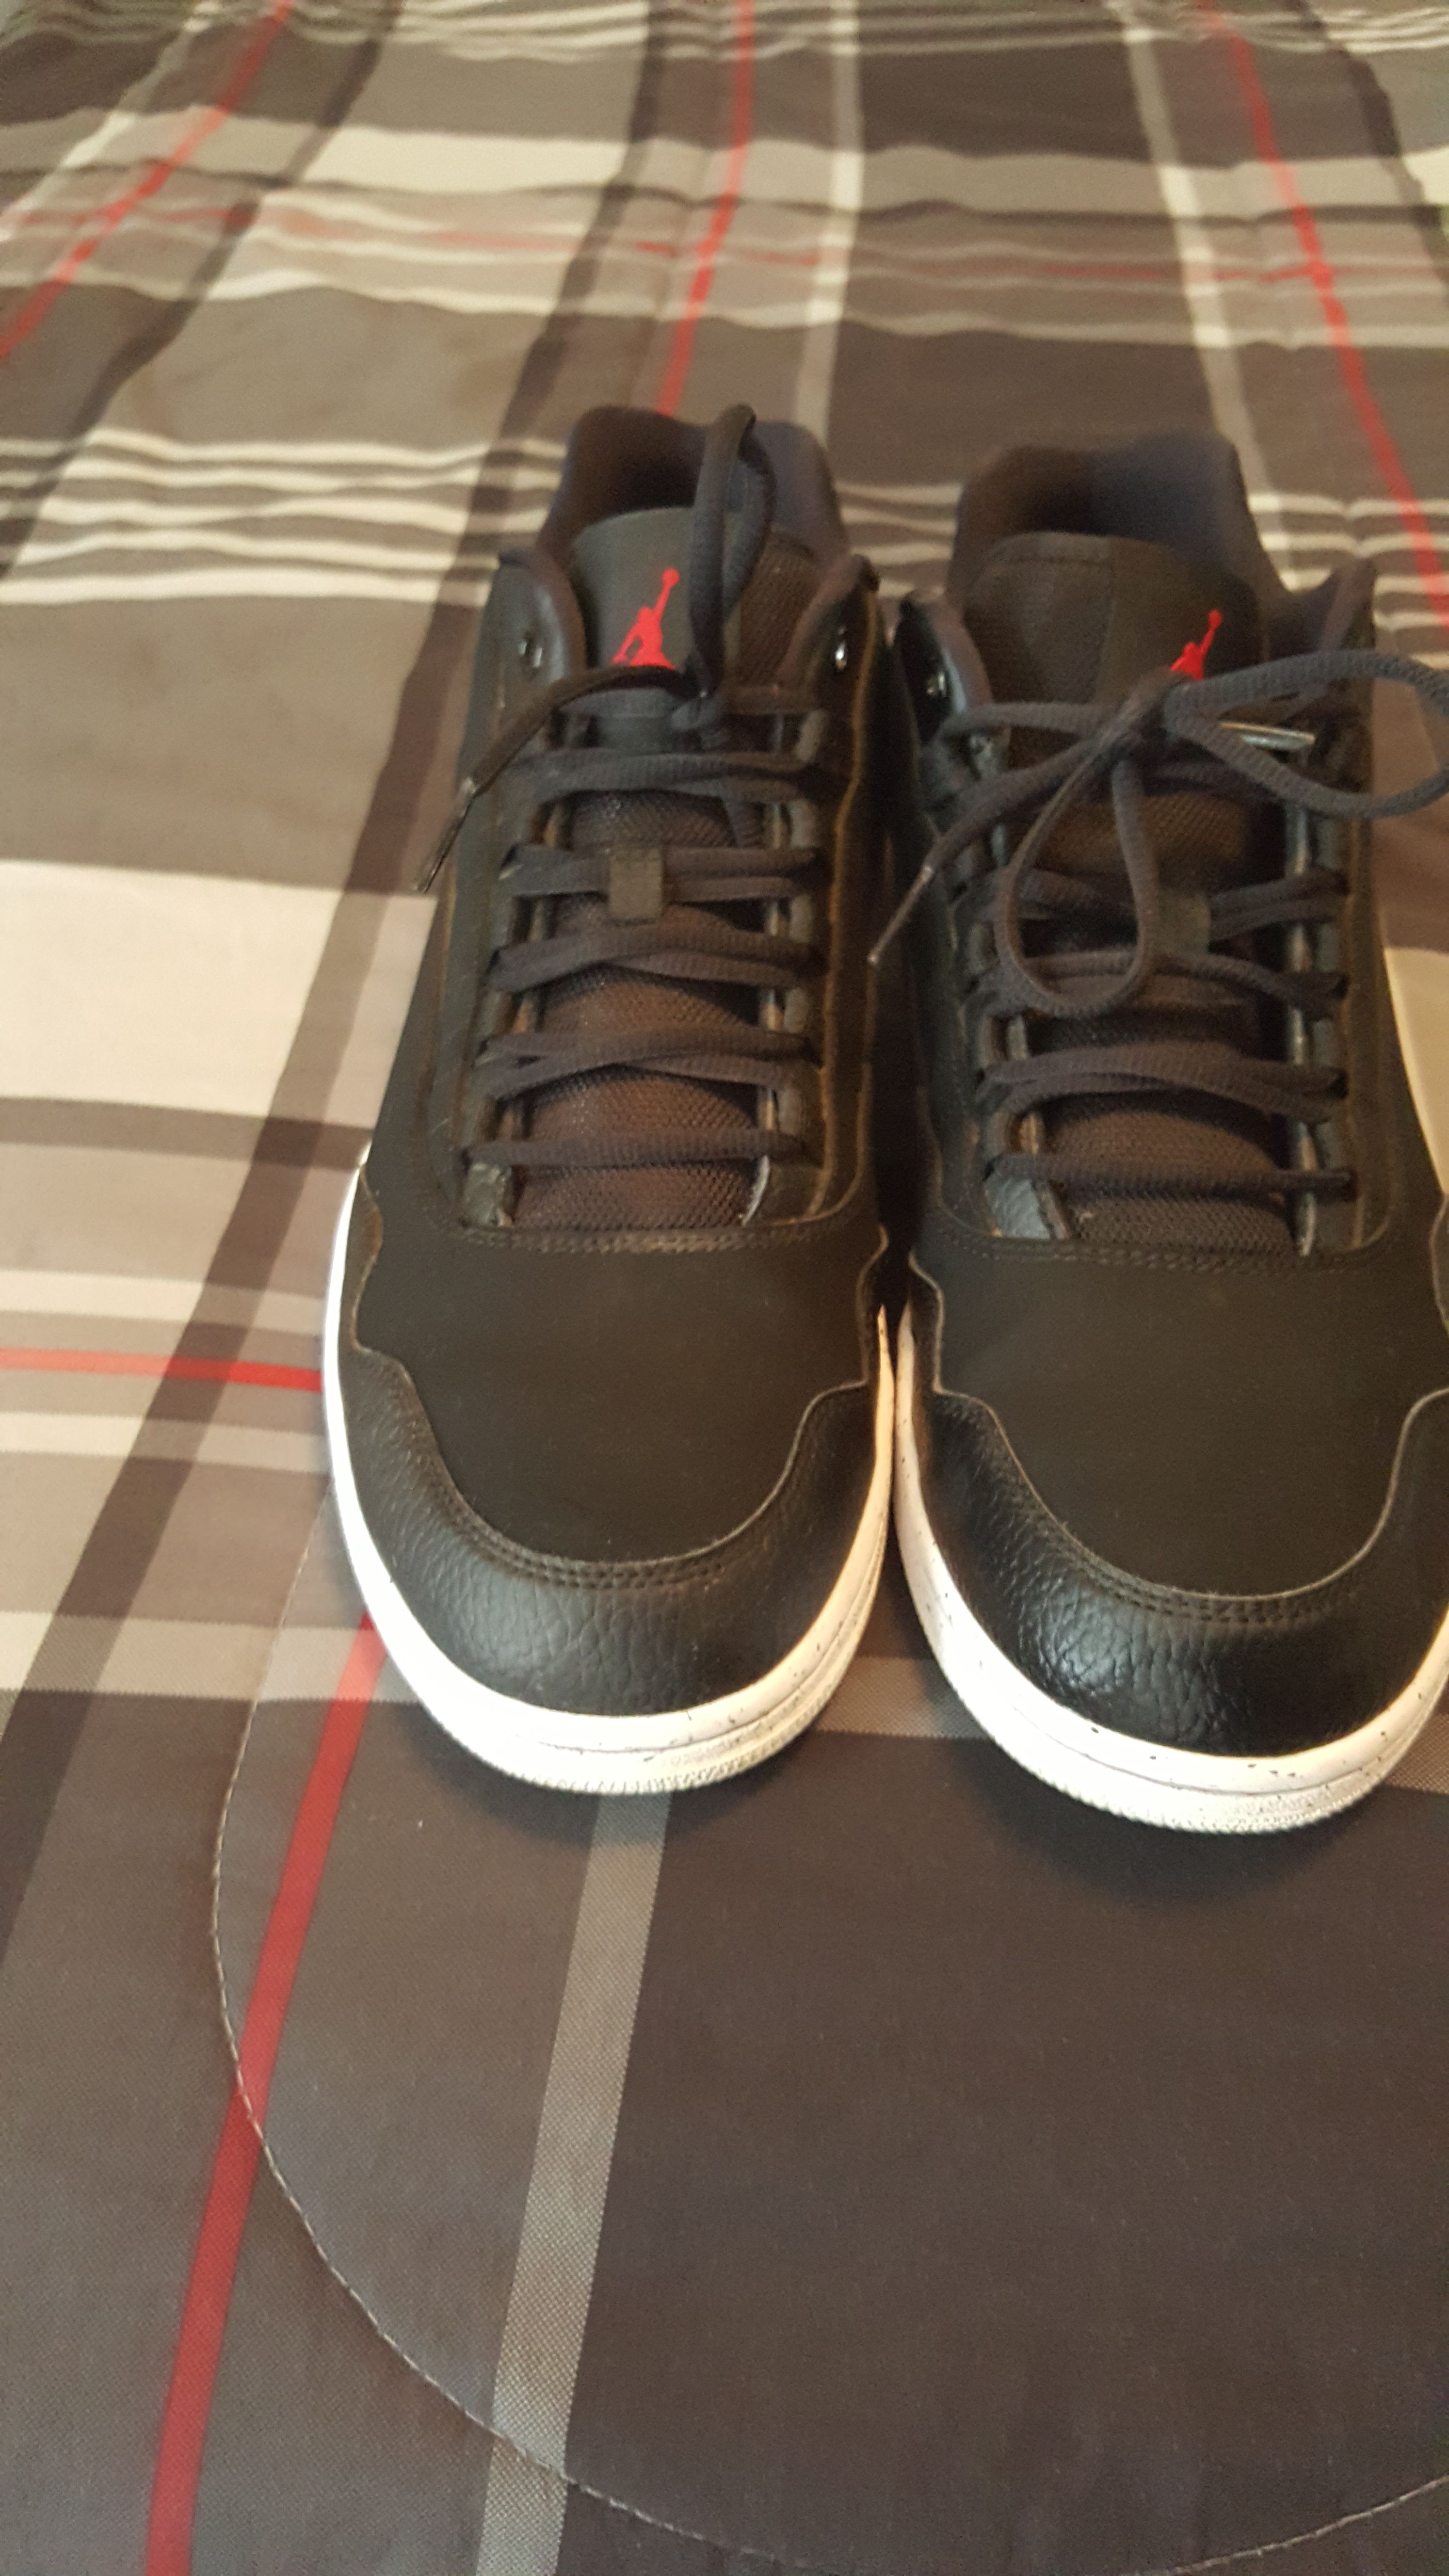 AIR EXECUTIVE LOW LIFESTYLE SHOE (BLACK/RED/WHITE) for in Spring, TX - OfferUp